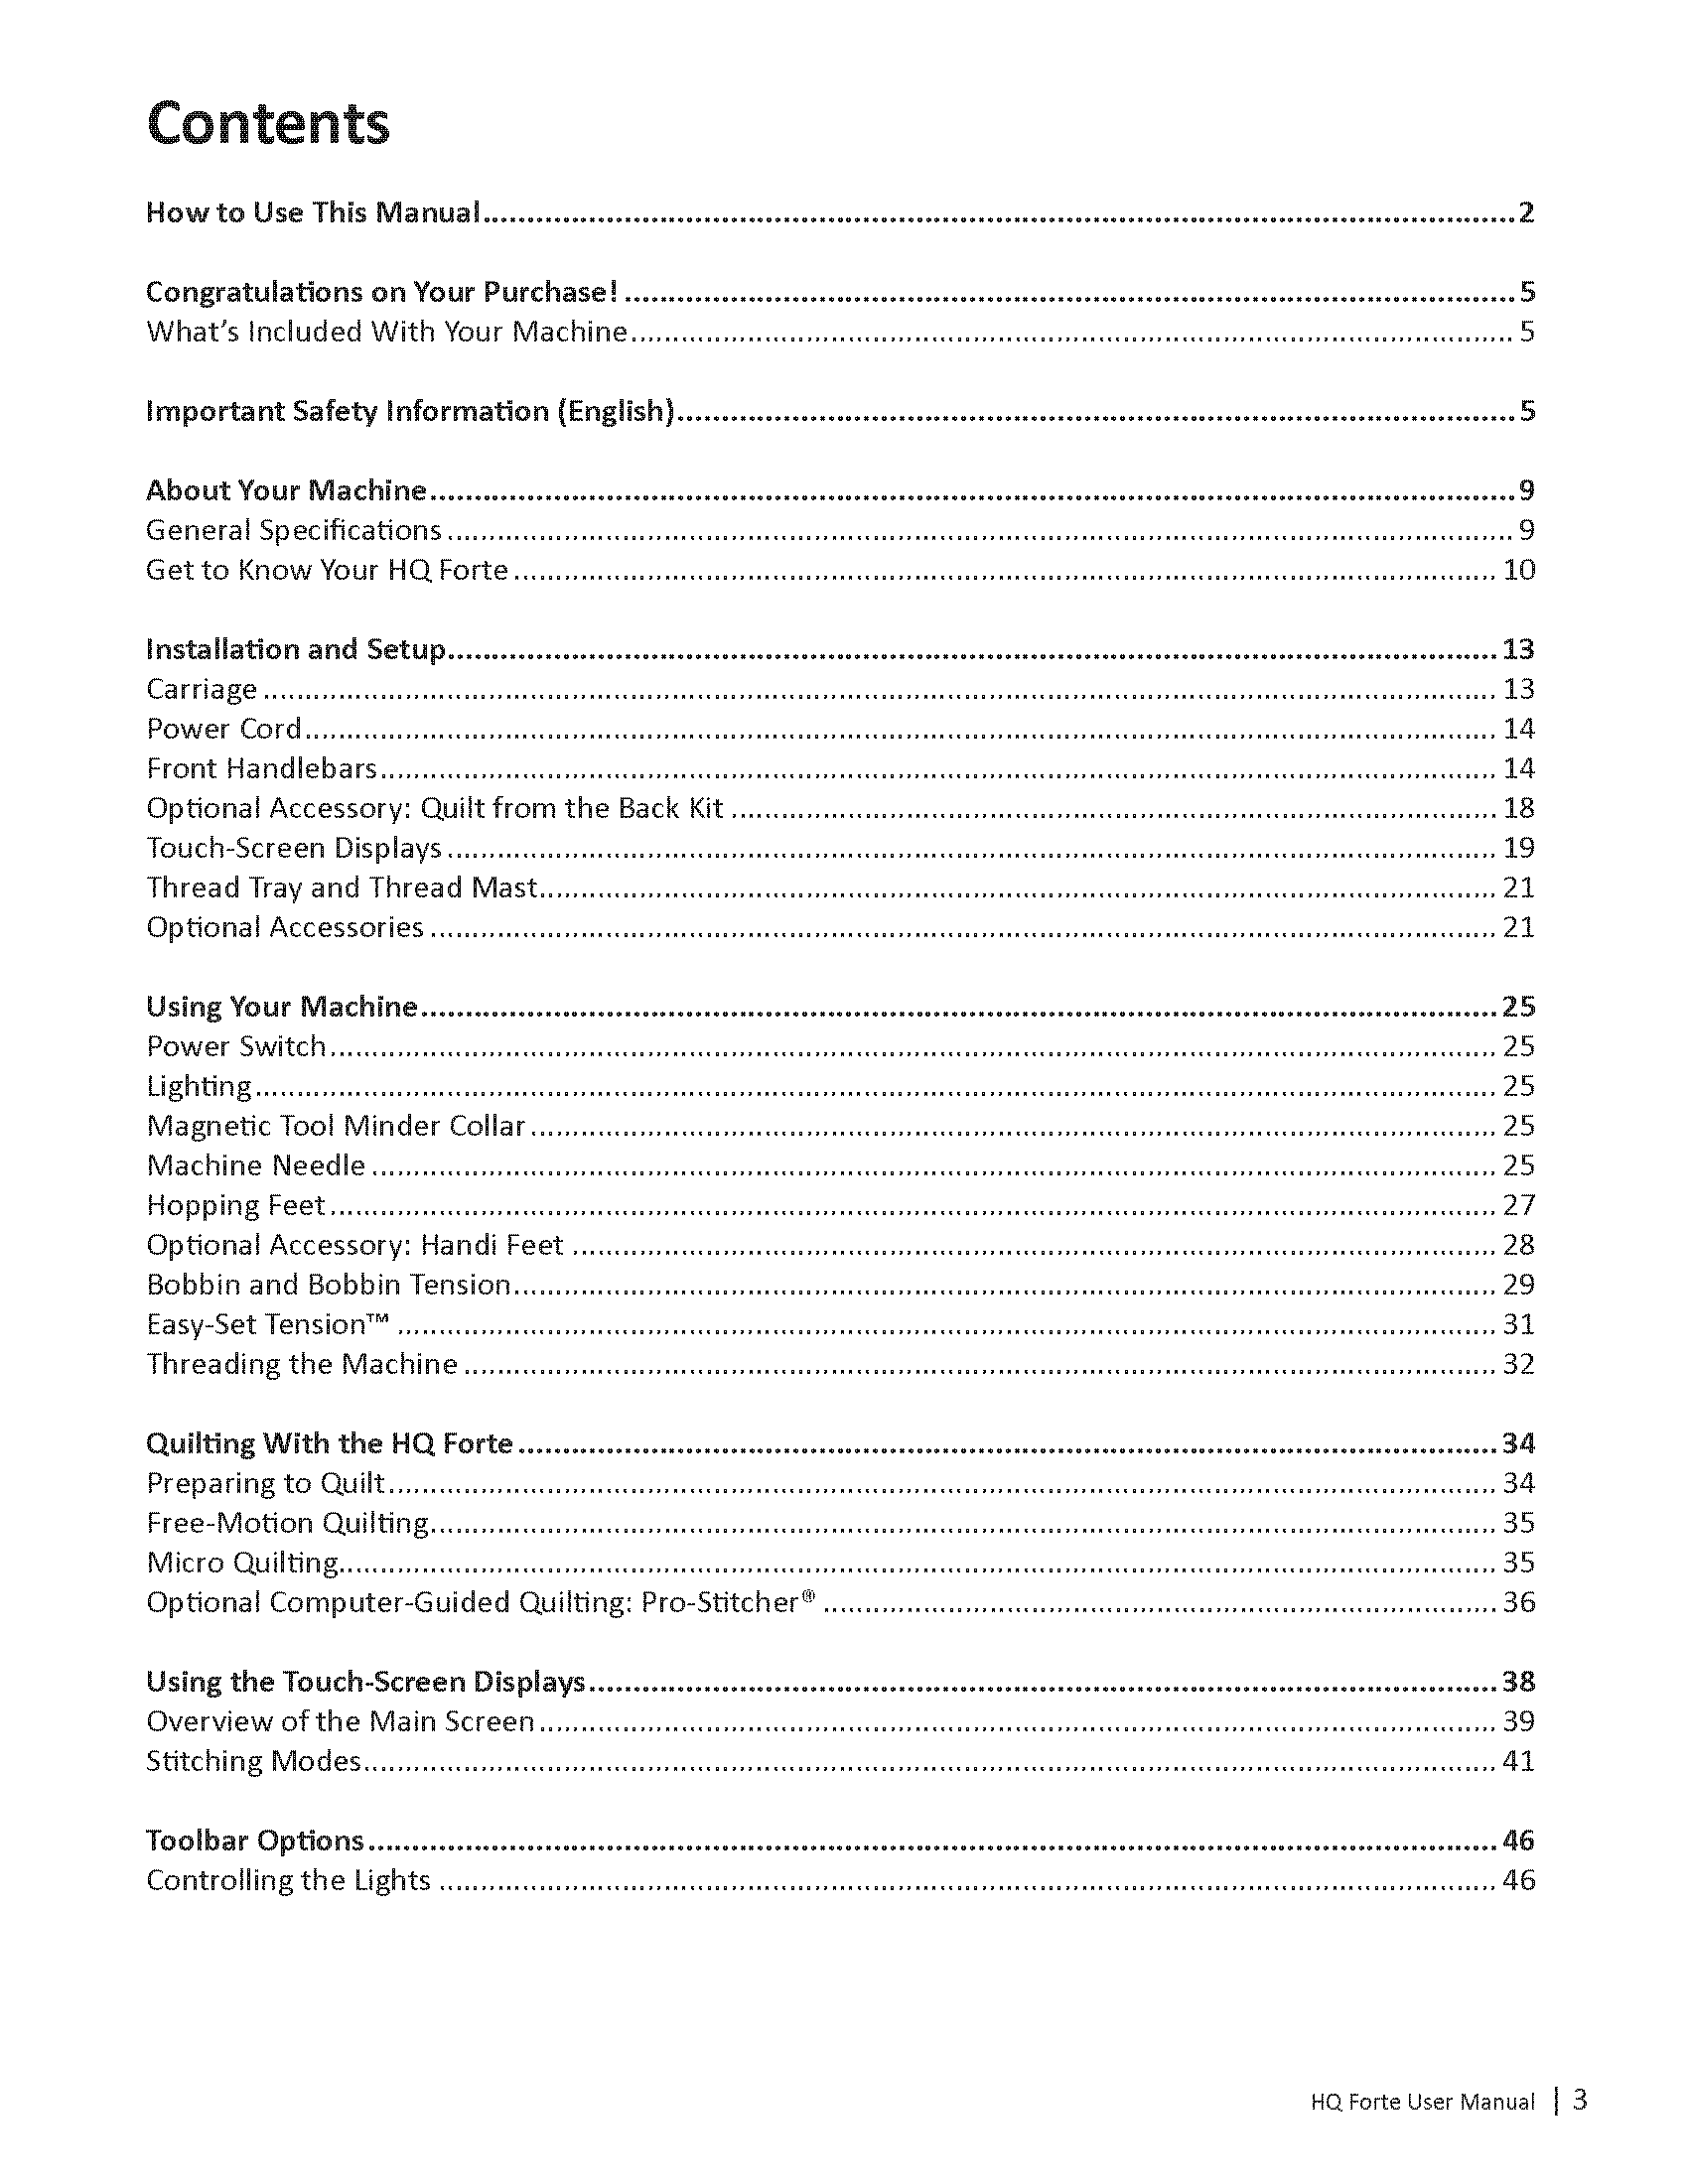 HQ-Forte-User-Manual-ALL-2_Page_04.png